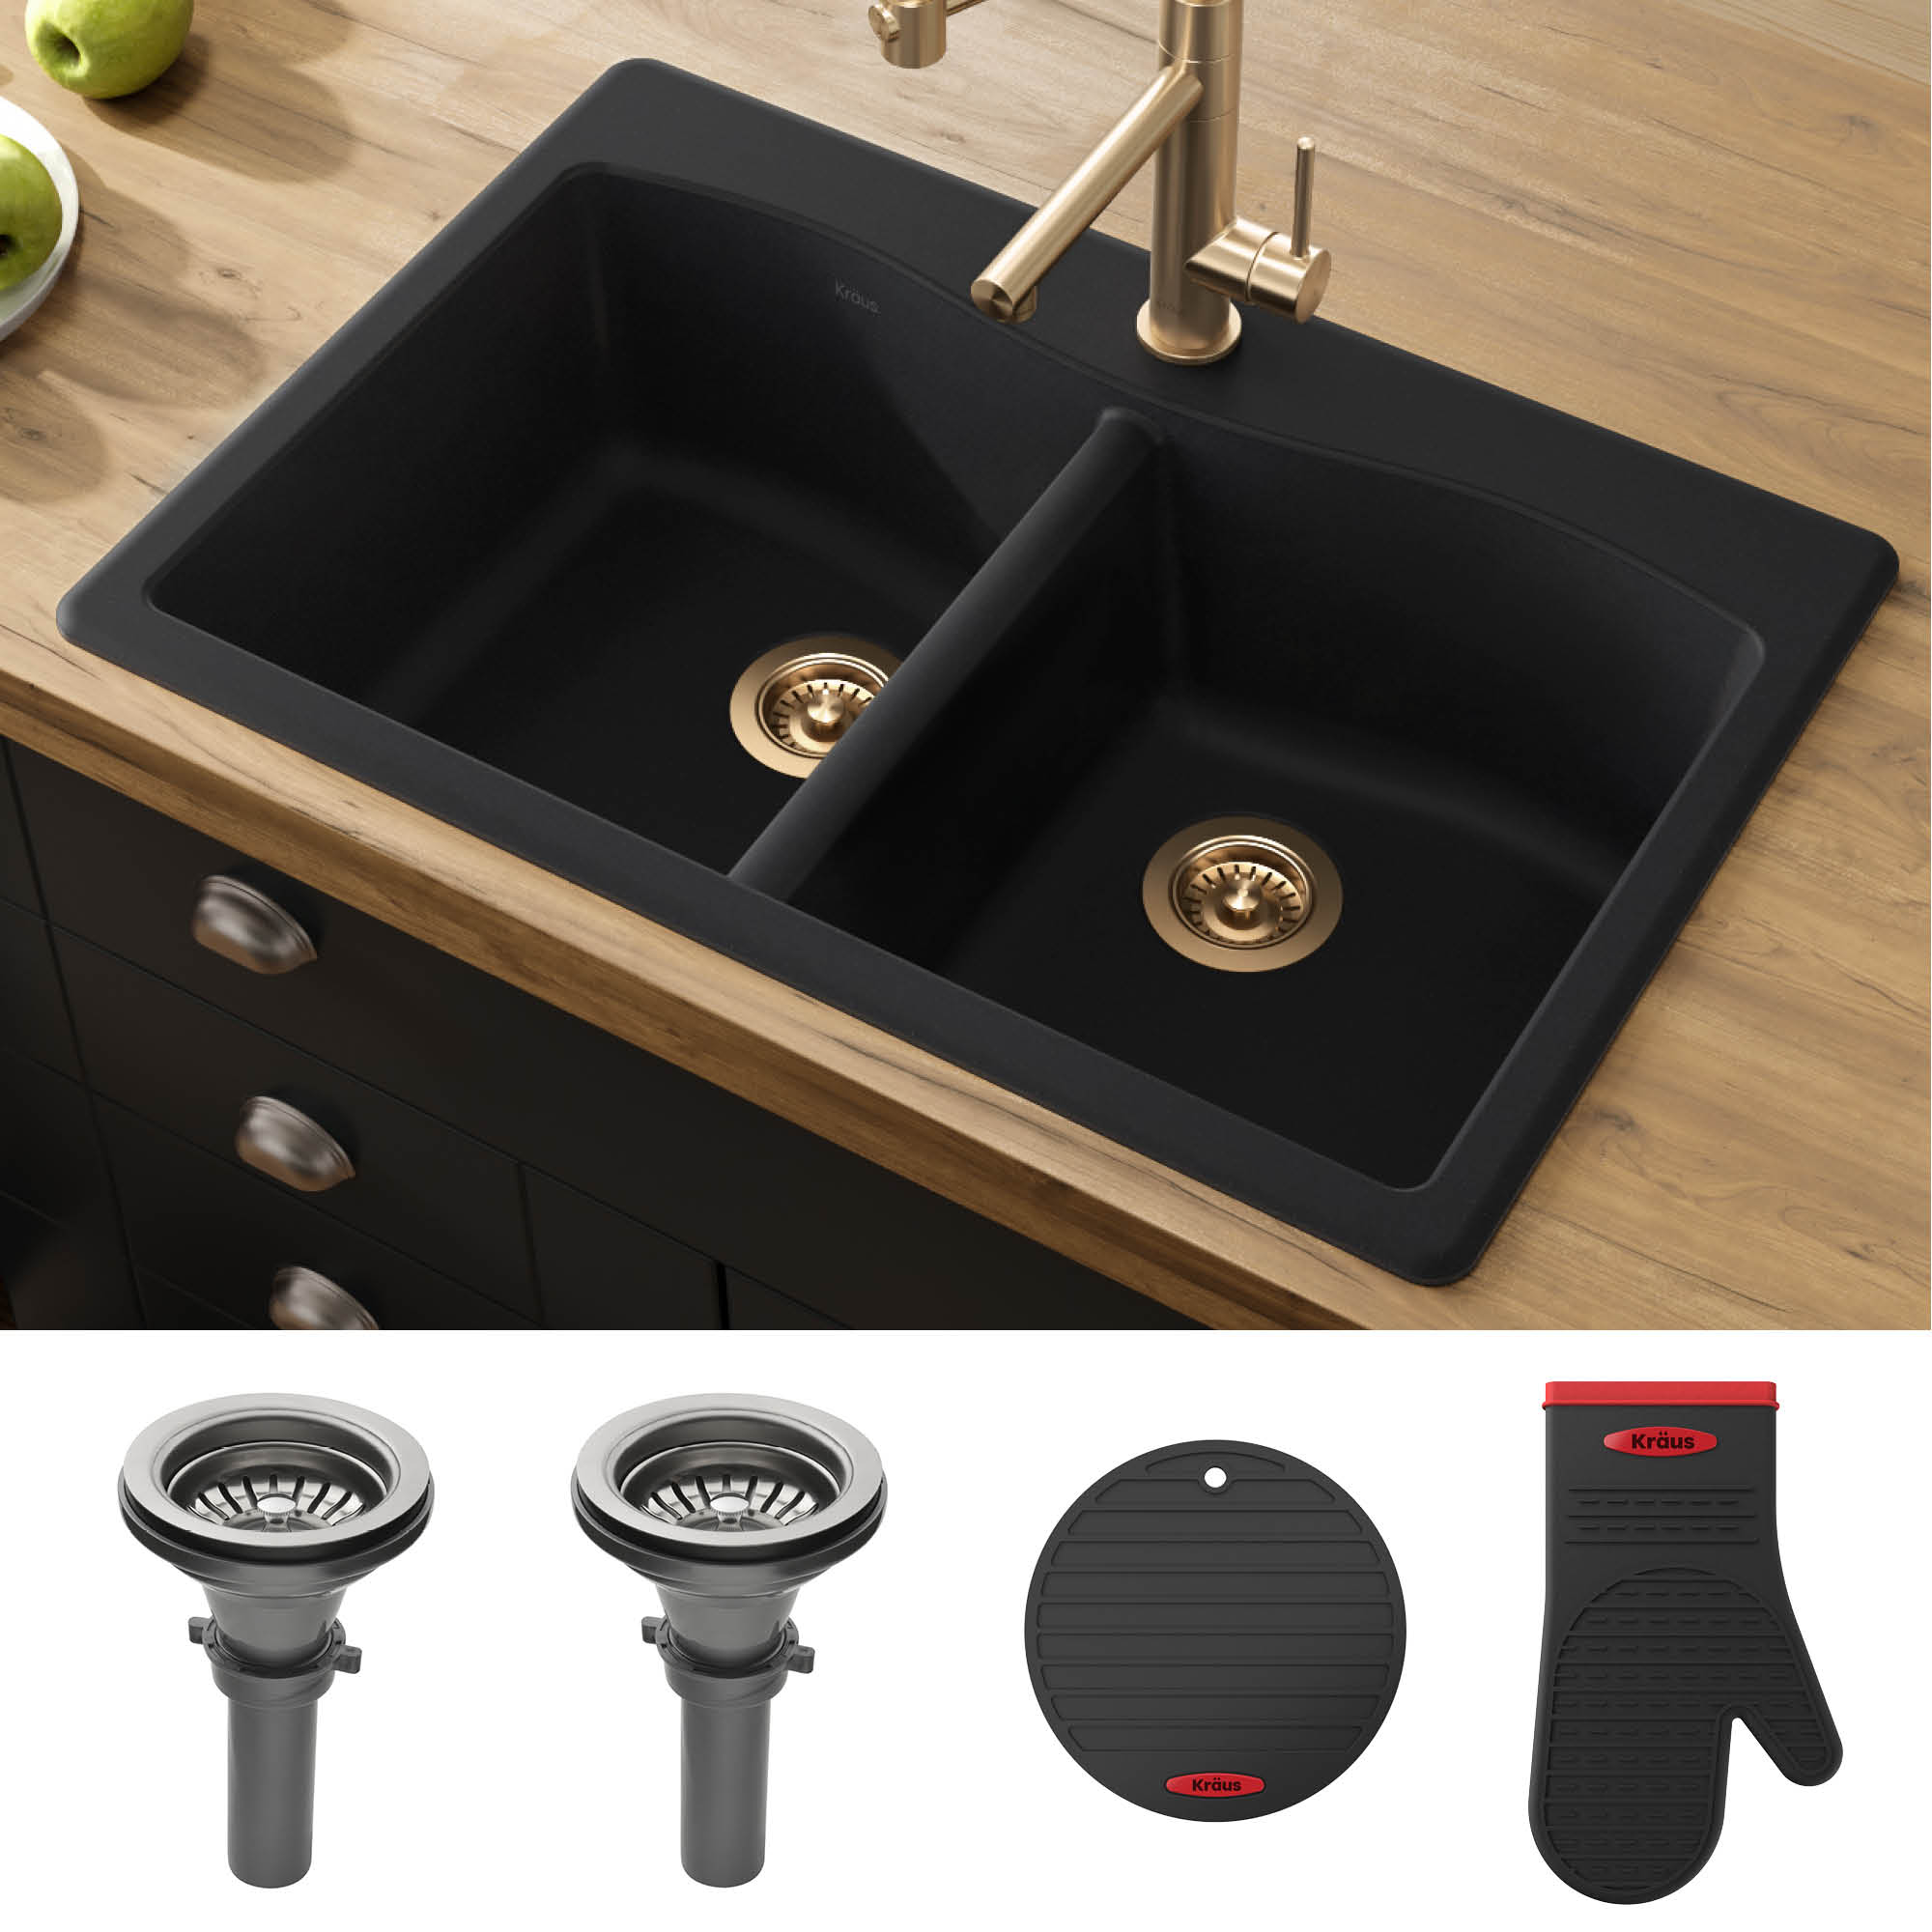 Chef 5 Min Meals 33 in. Dual Mount 50 to 50 Double Bowl Granite Kitchen Sink, Black